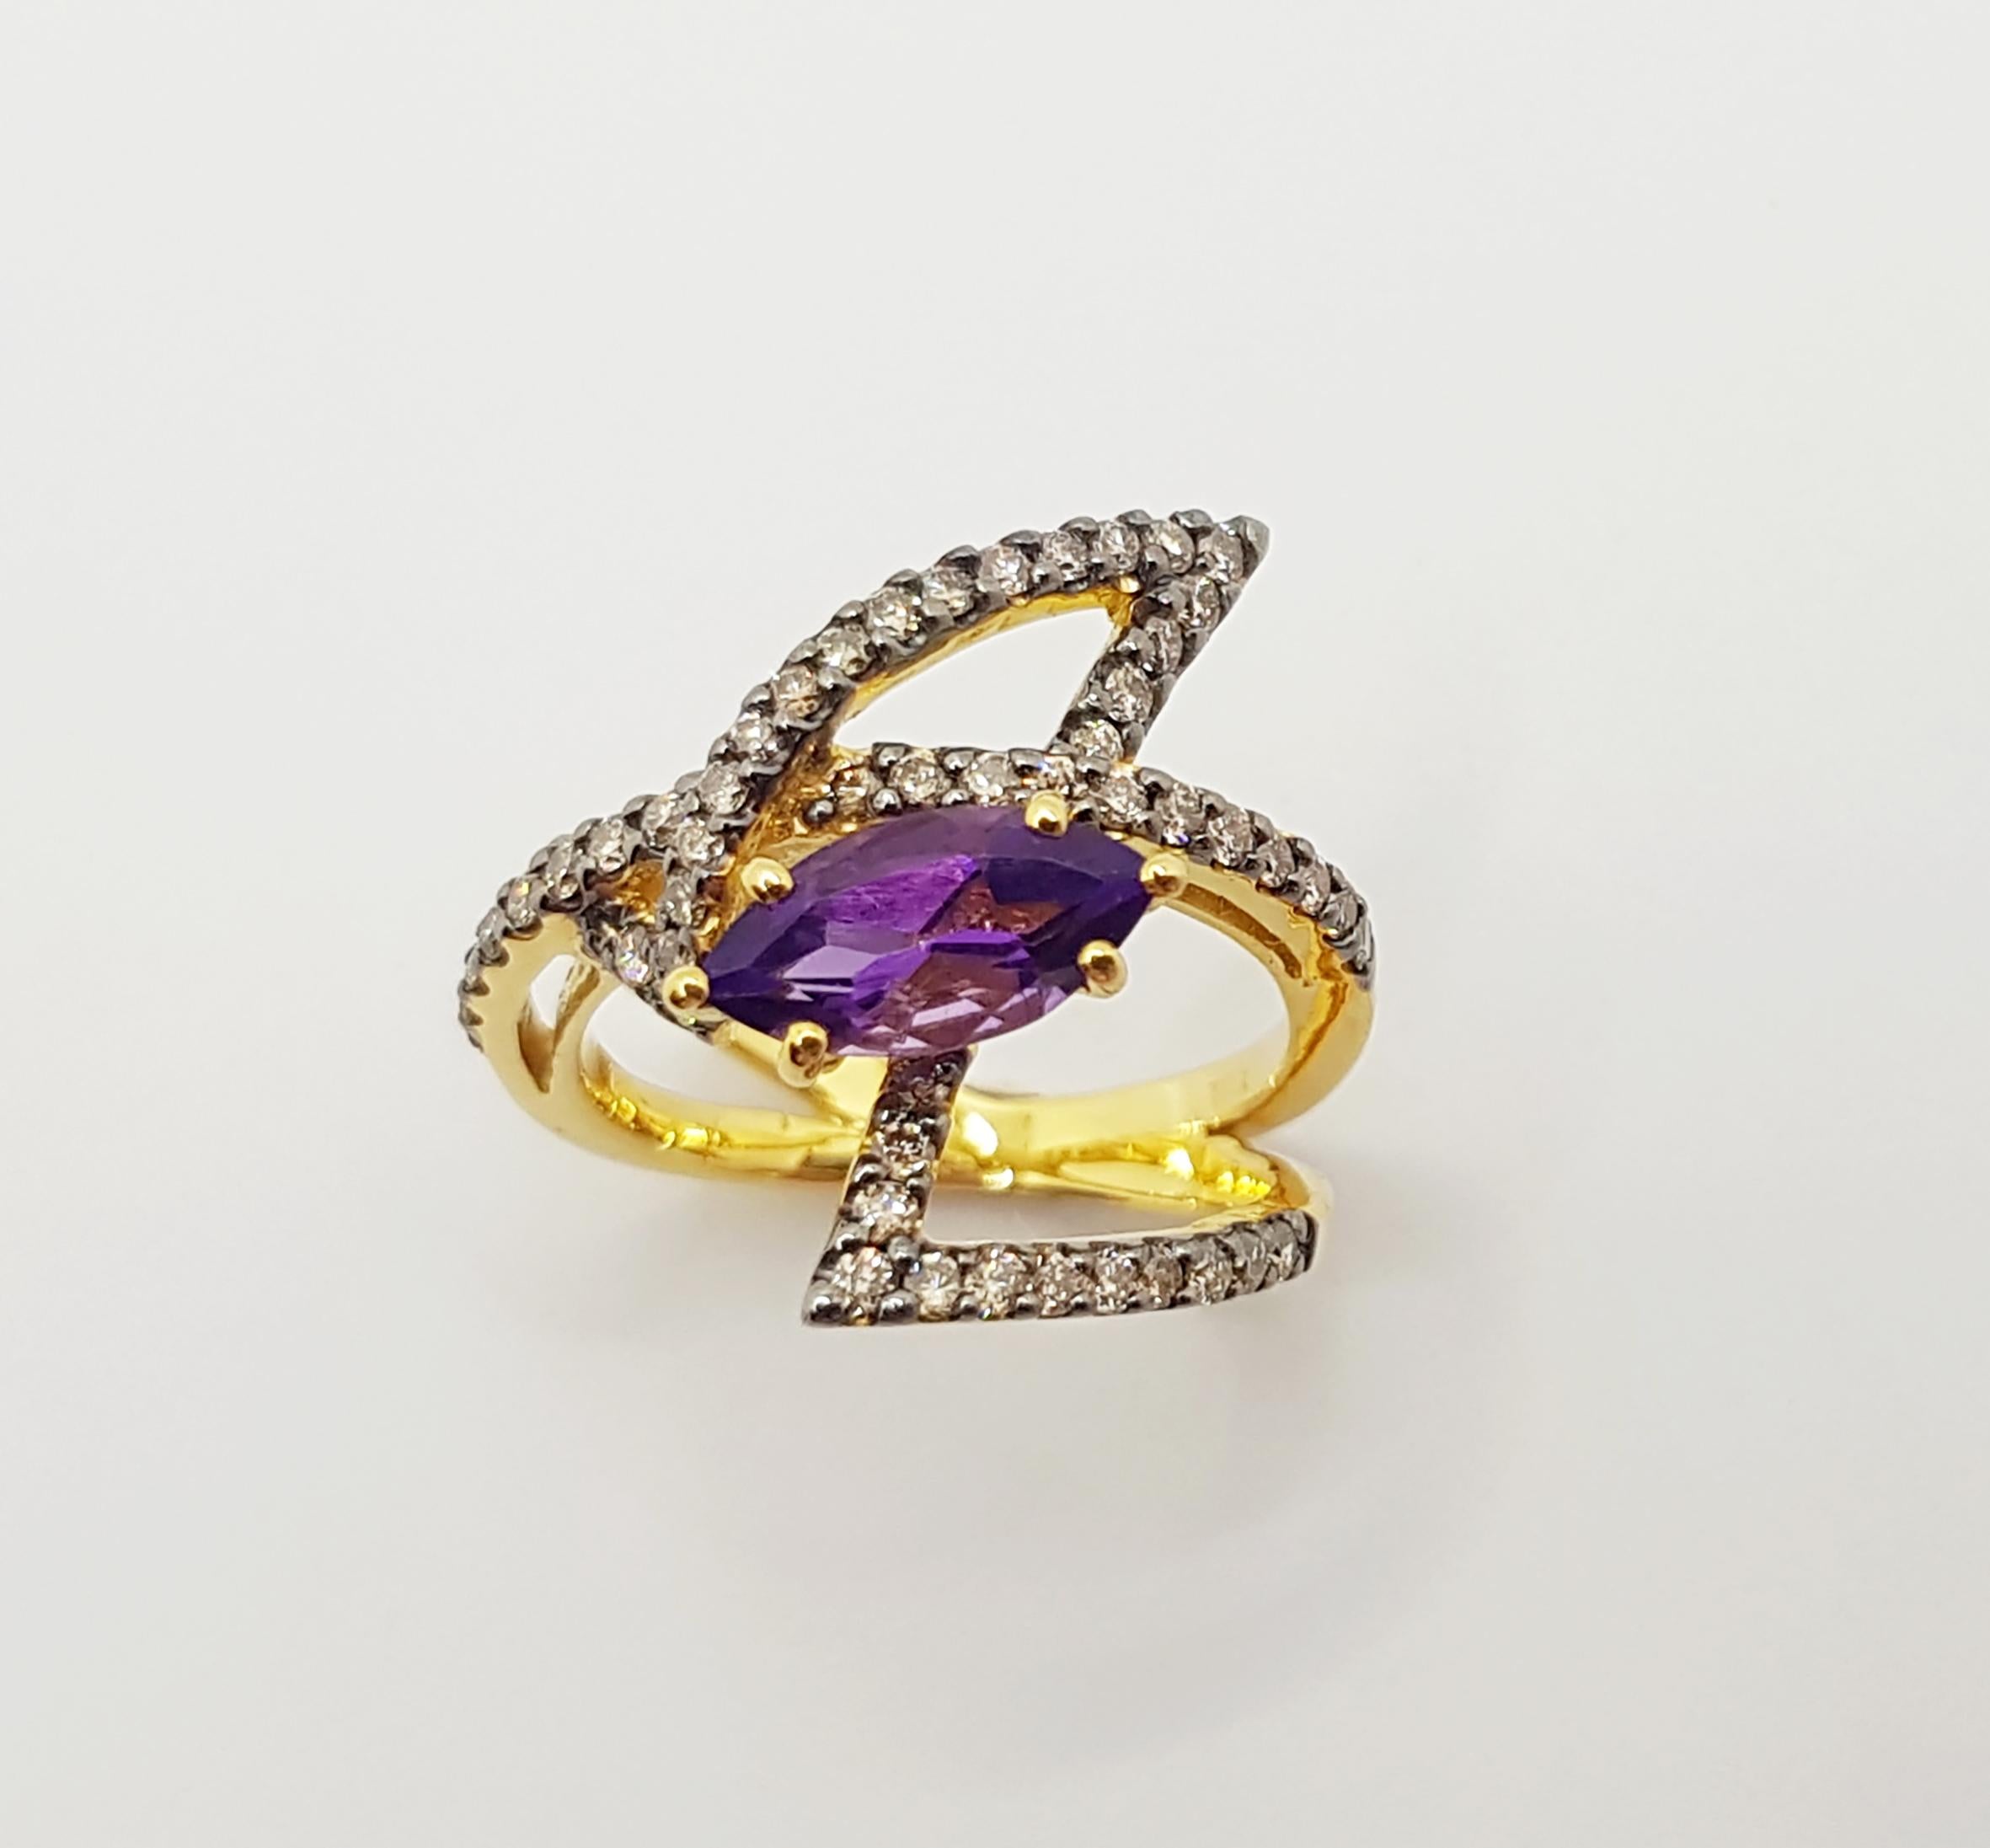 Amethyst with Brown Diamond Ring Set in 18 Karat Gold by Kavant & Sharart For Sale 9